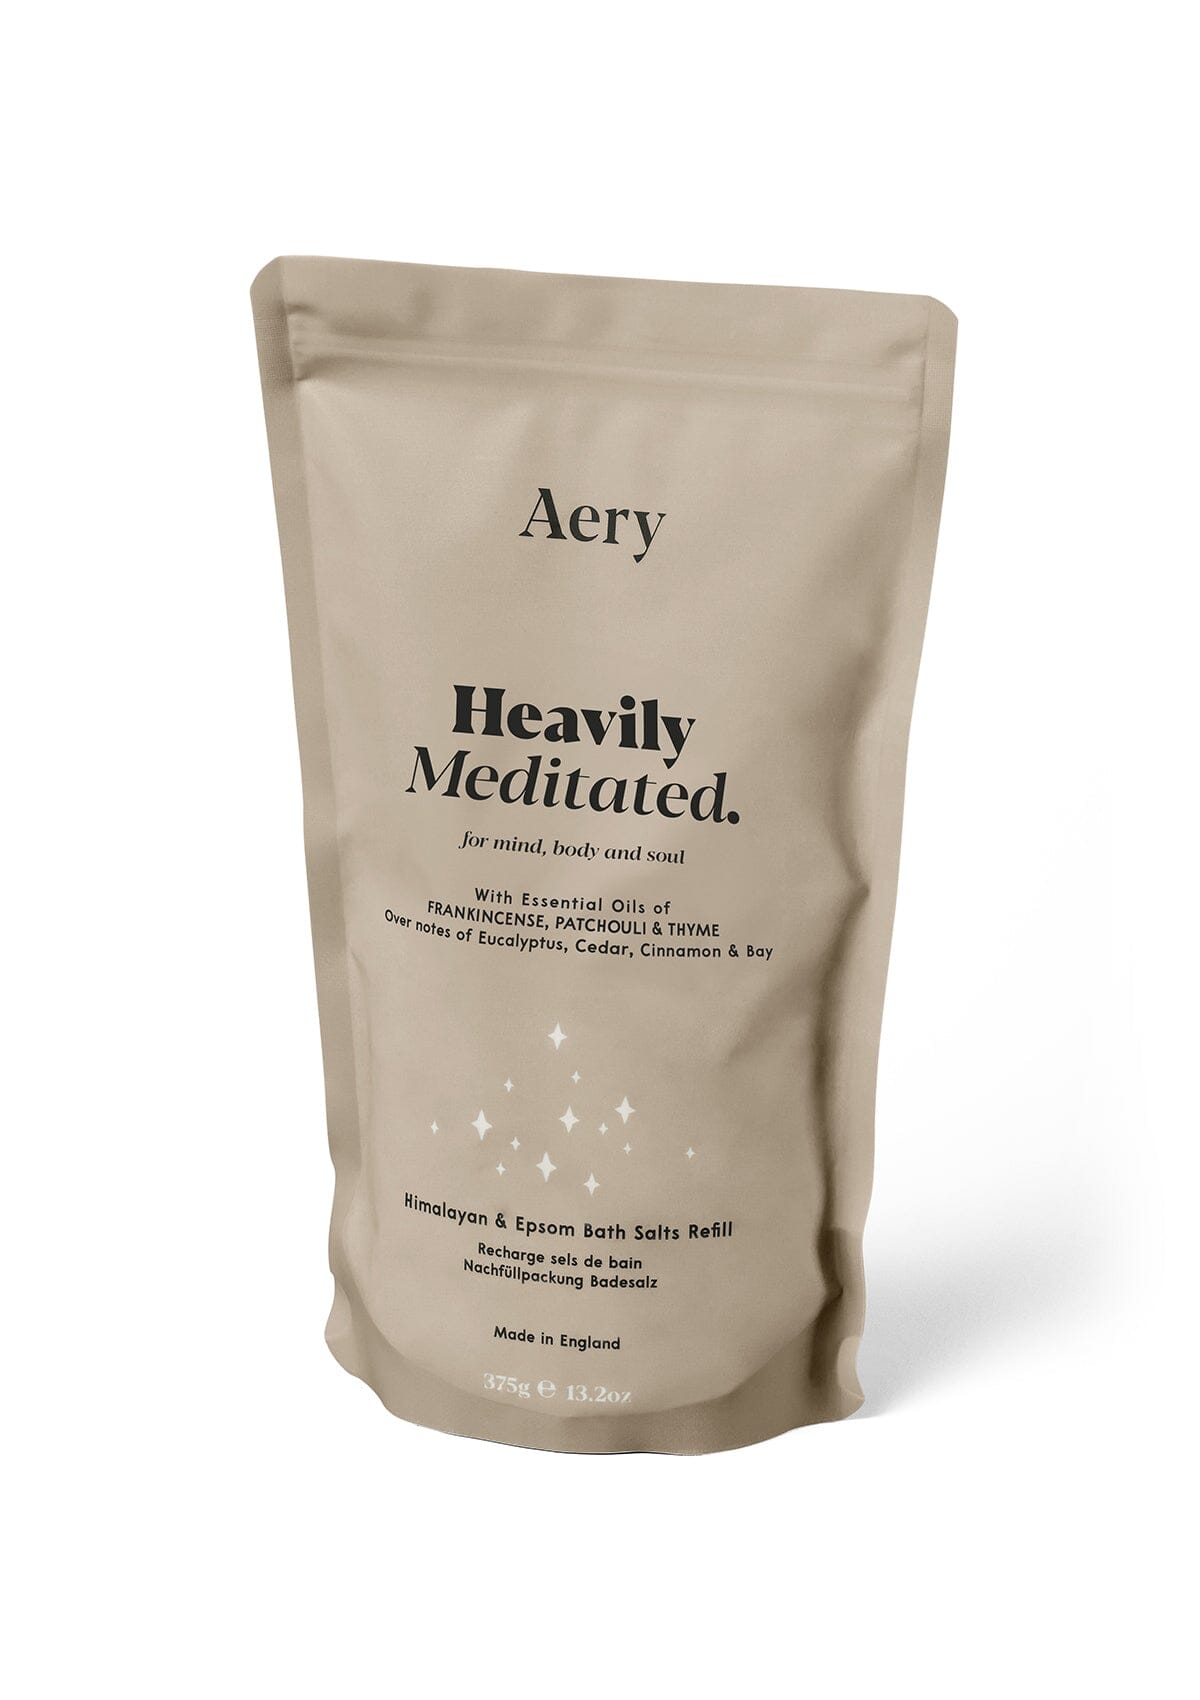 Beige Heavily Meditated bath salts refill pouch by Aery displayed on white background